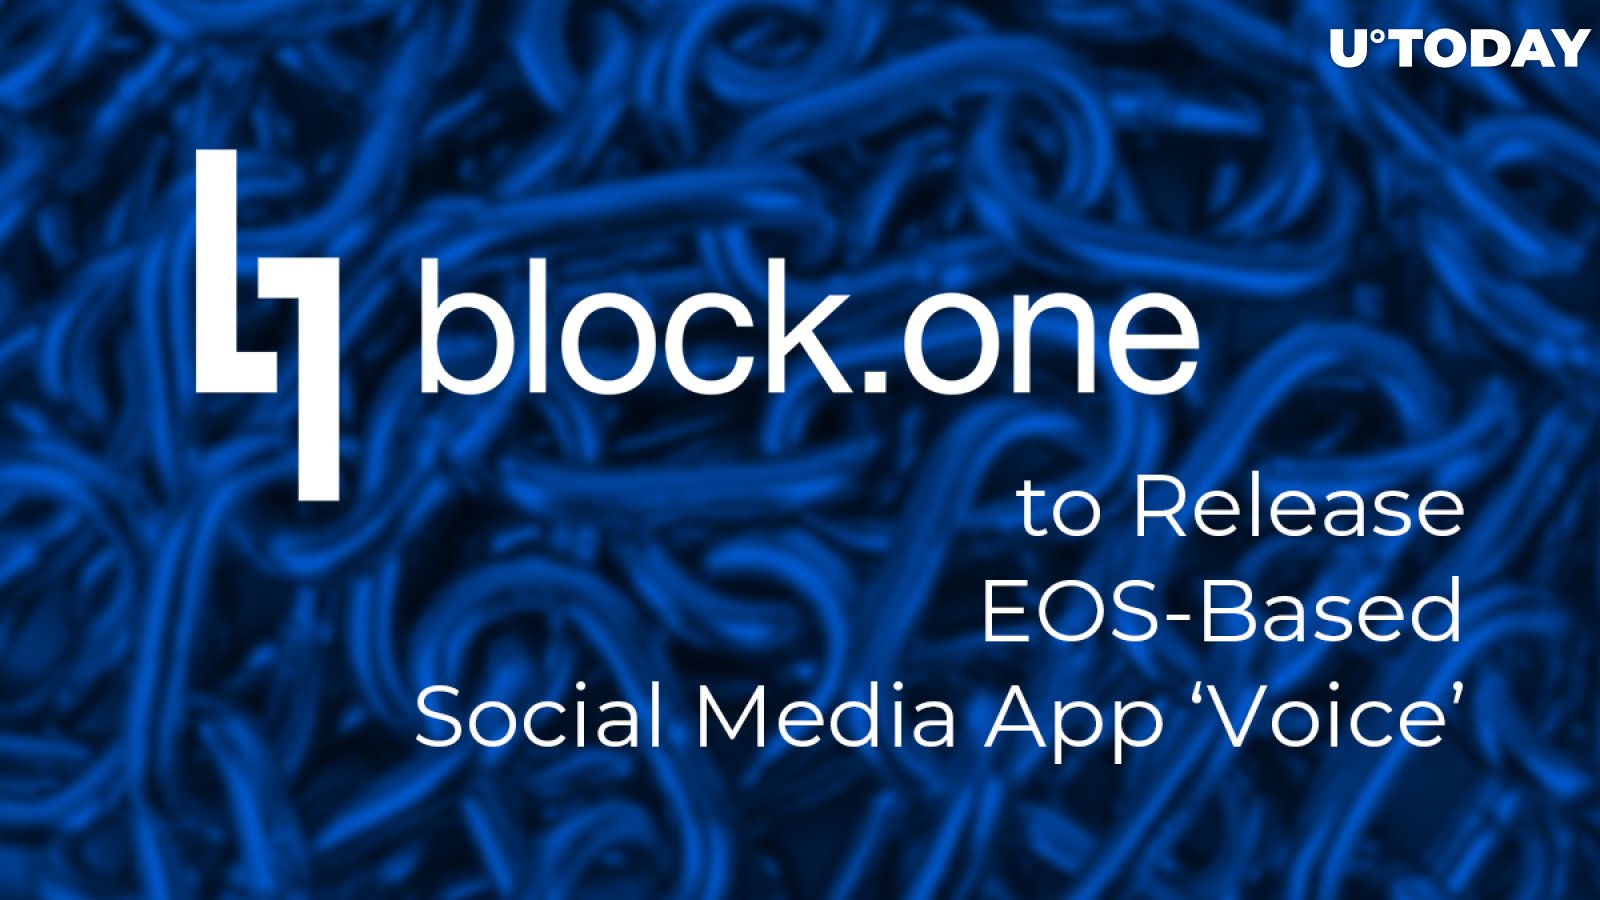 Block.One to Release EOS-Based Social Media App ‘Voice’